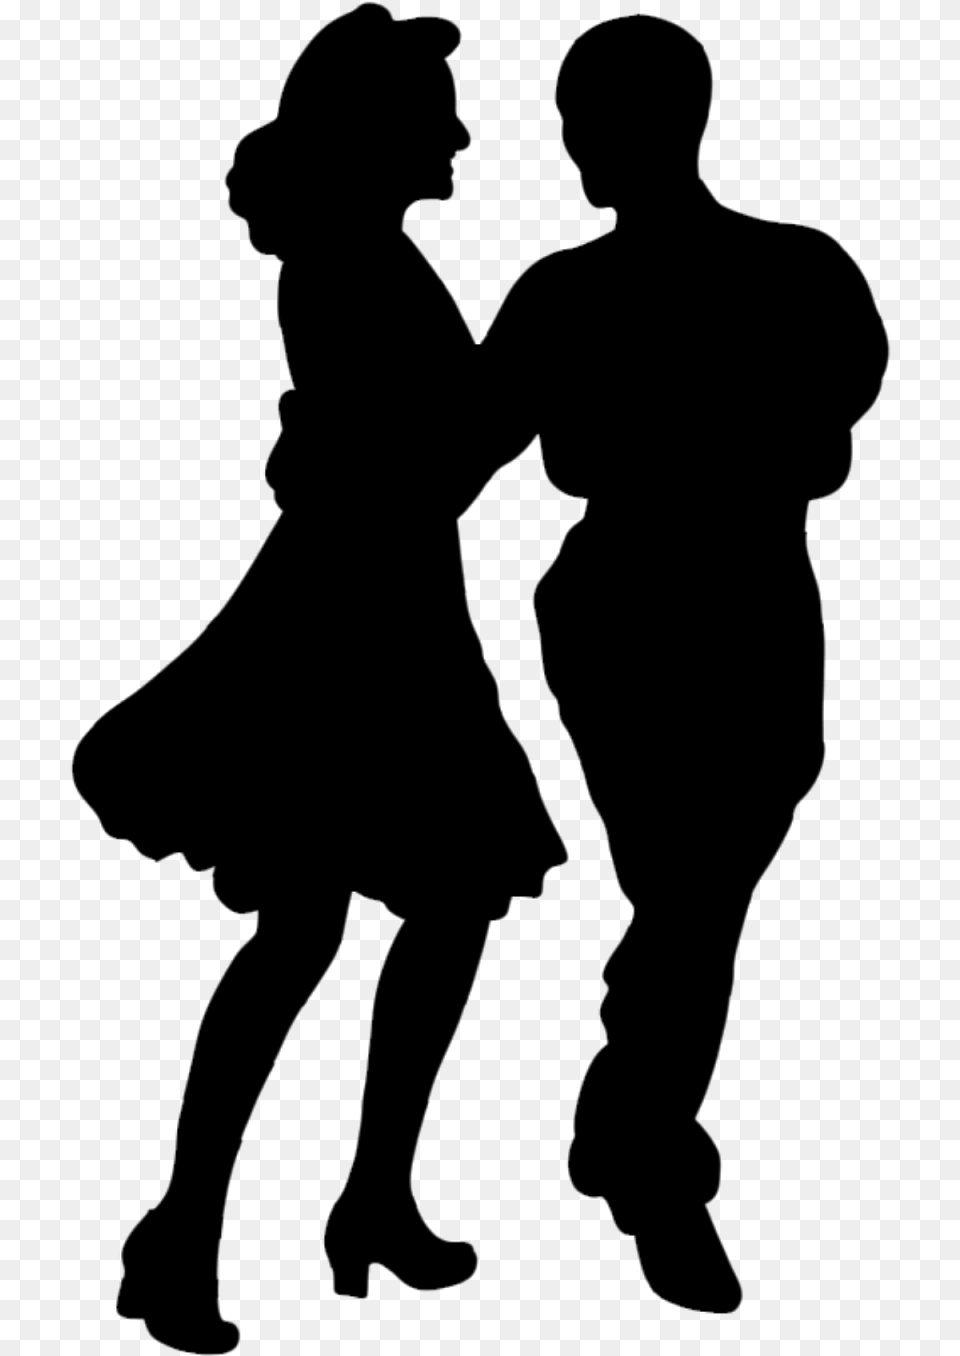 Illustration Of Dance Silhouette Couple Couple Dance Silhouette, Gray Free Png Download